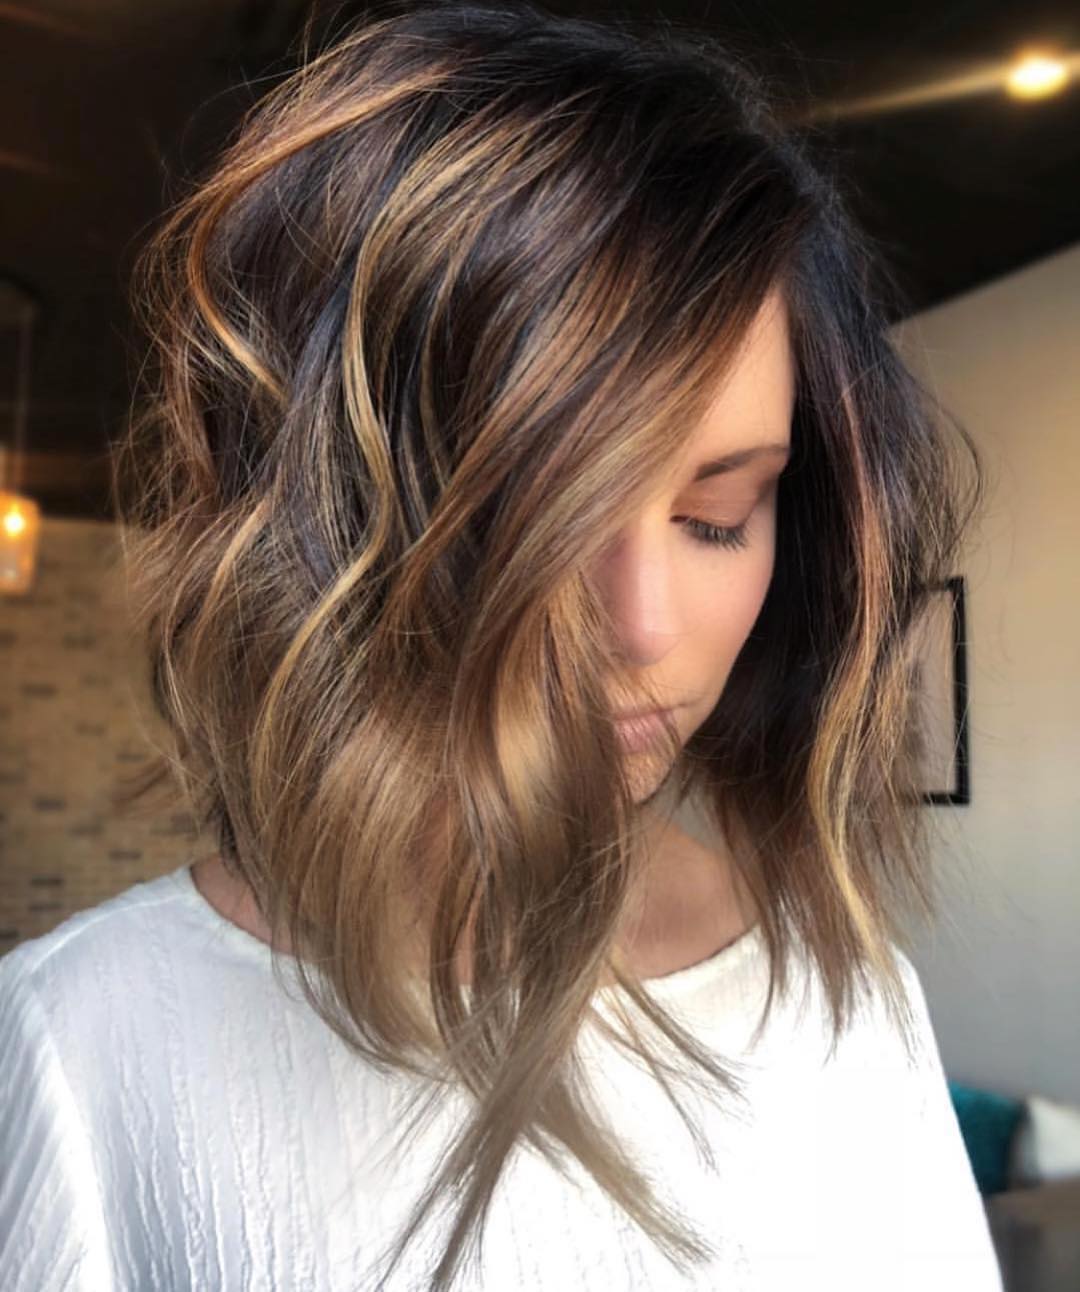 10 Trendy Ombre And Balayage Hairstyles For Shoulder Length